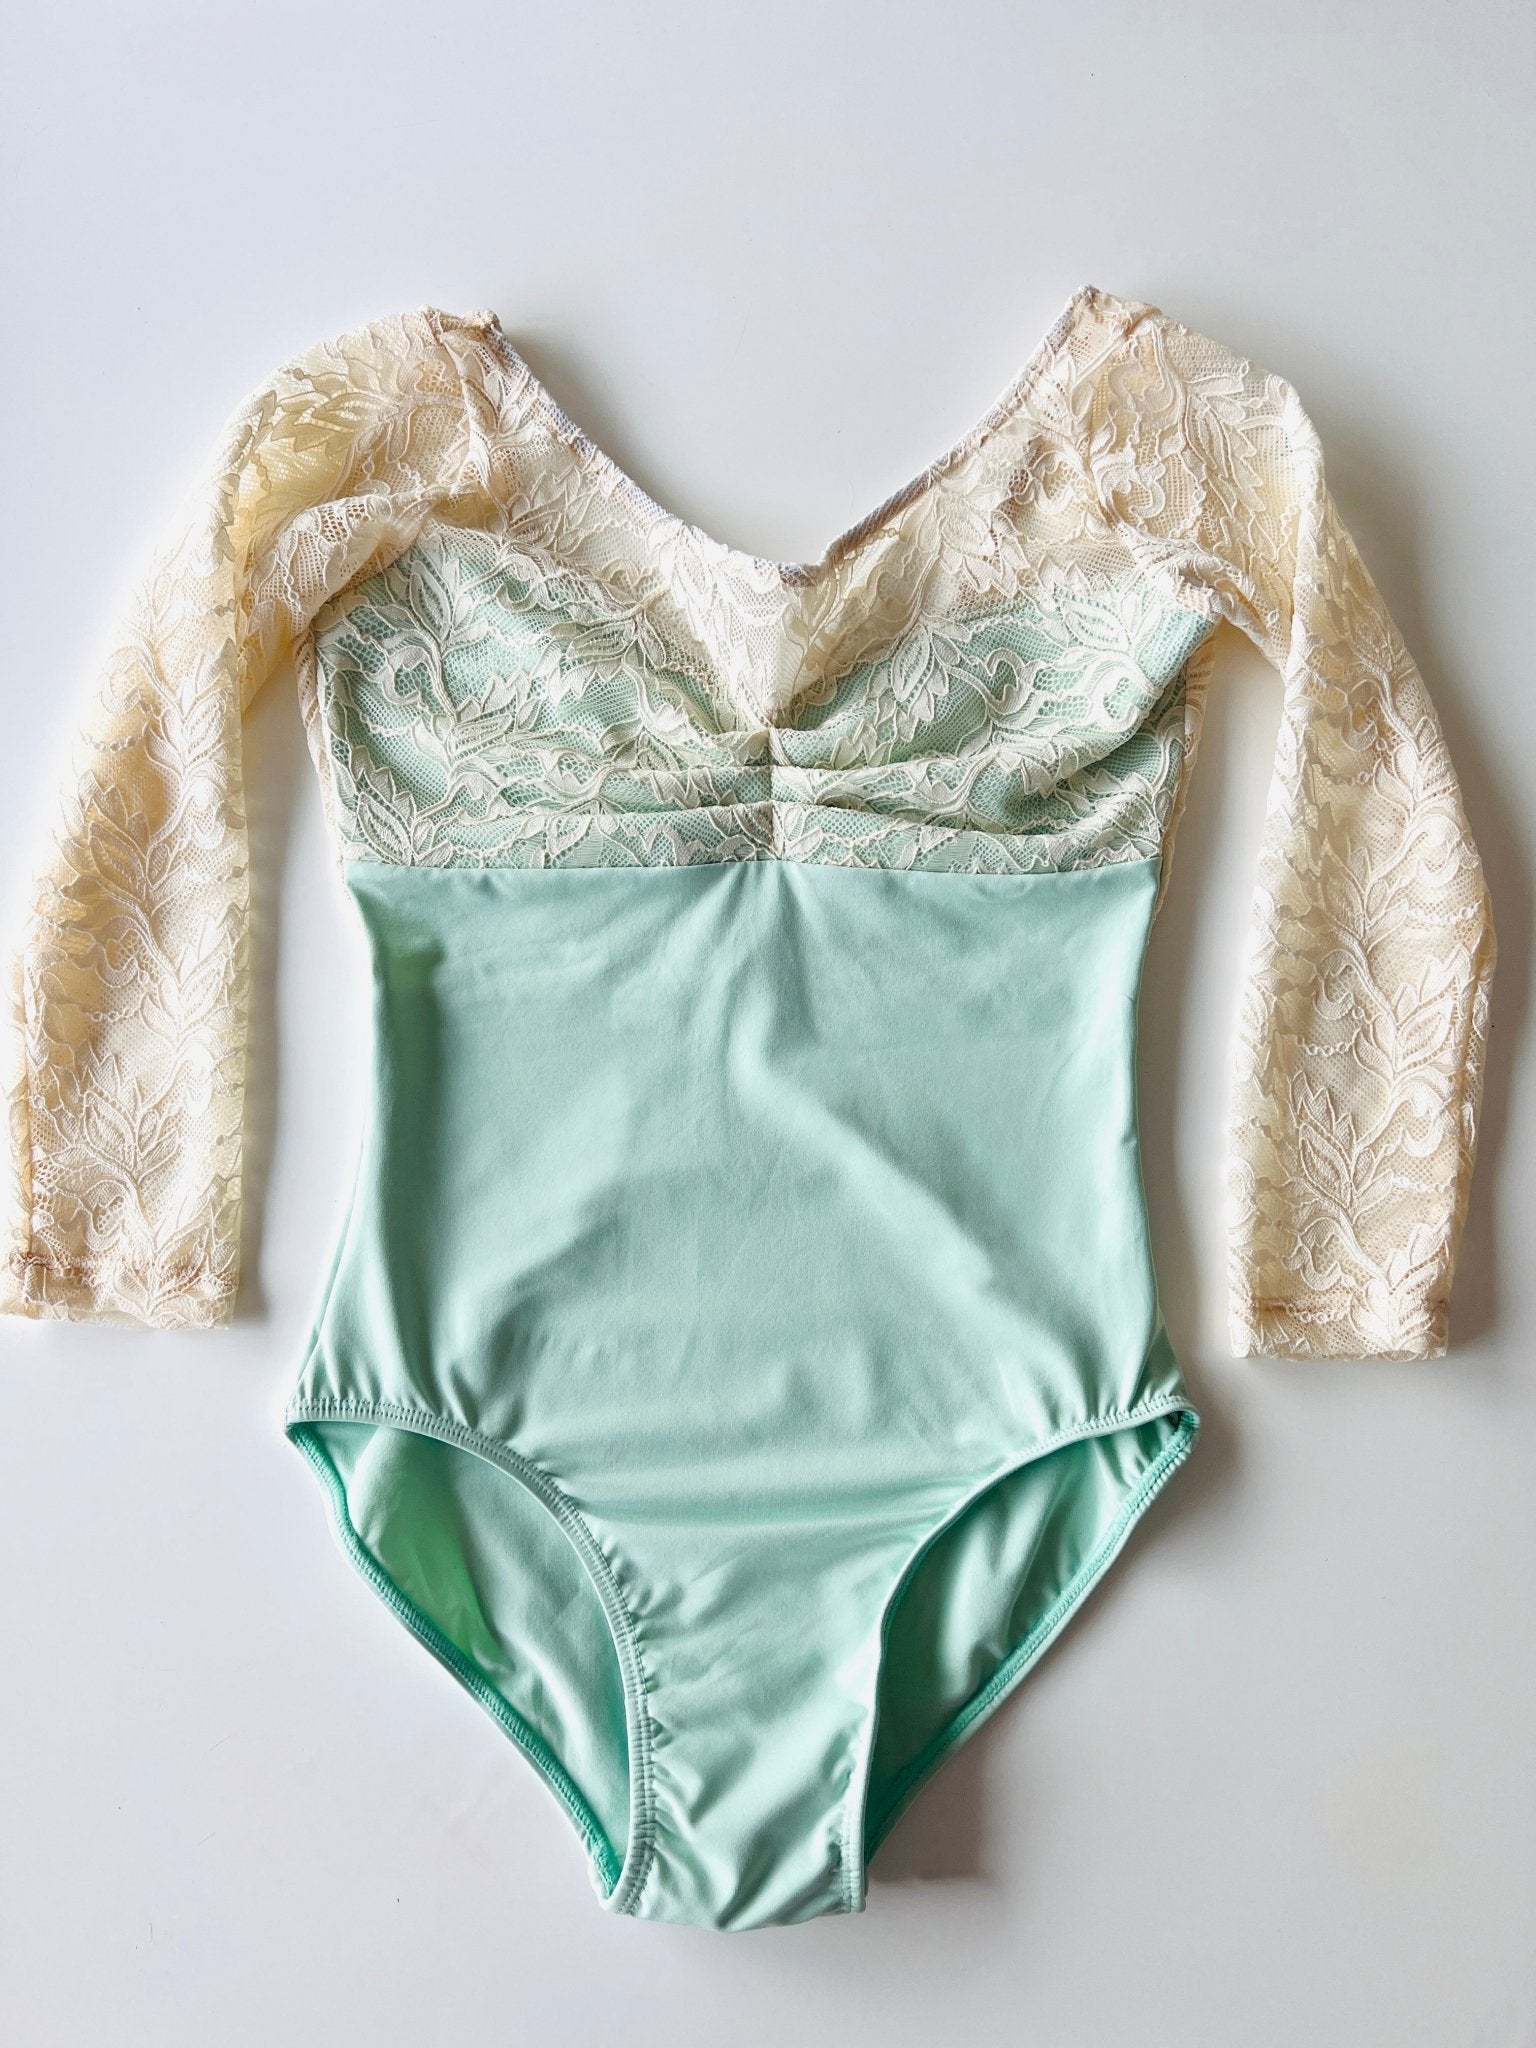 Lace Sleeve Leotard - Mint Green - THE COLLECTIVE DANCEWEARLace Sleeve Leotard - Mint Green#mLeotardTHE COLLECTIVE DANCEWEAR